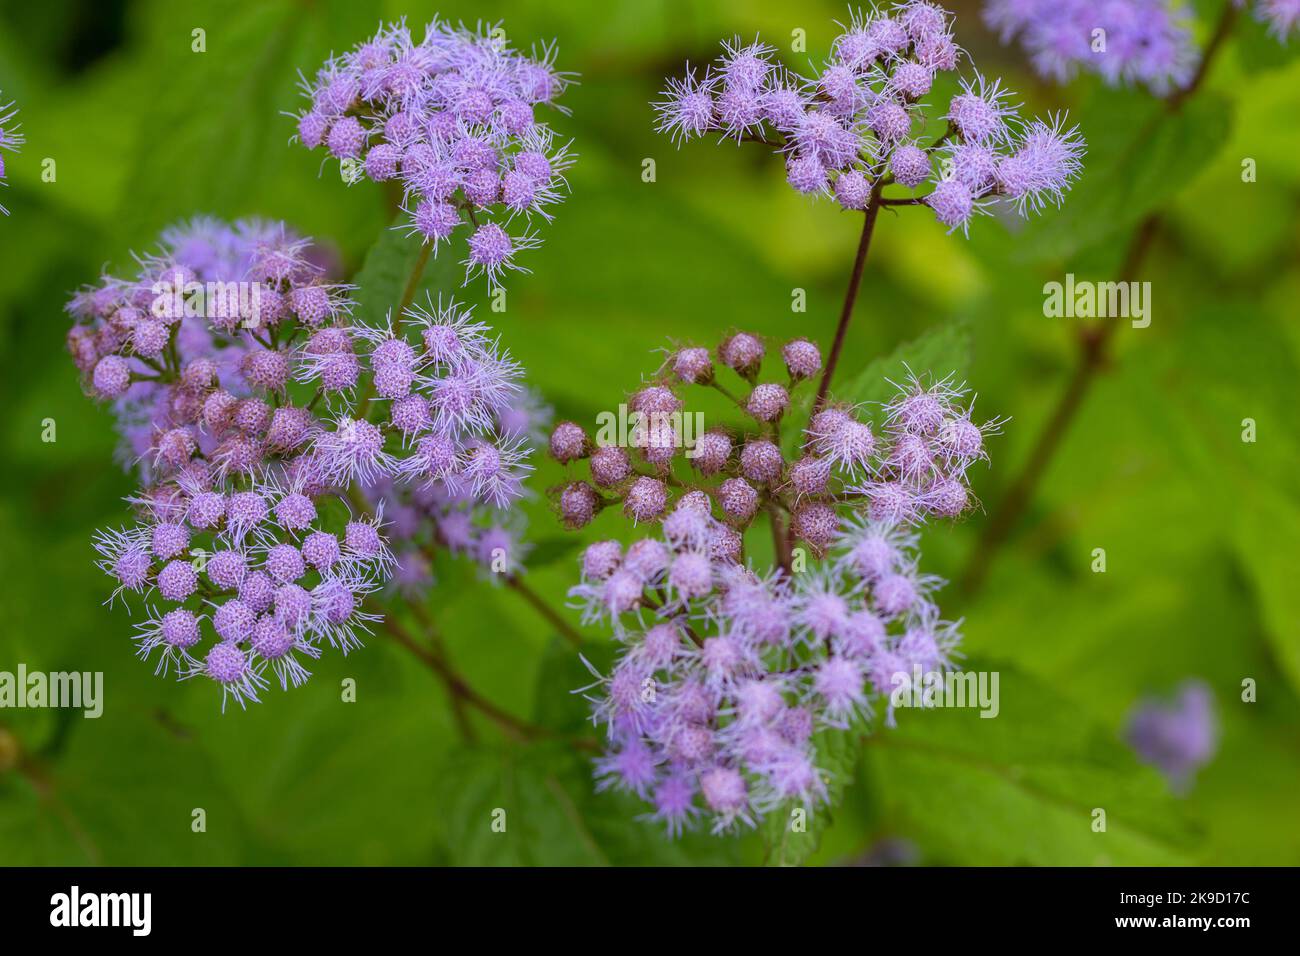 This image shows a macro view of blue mistflower (conoclinium coelestinum) blossoms in a sunny autumn garden Stock Photo